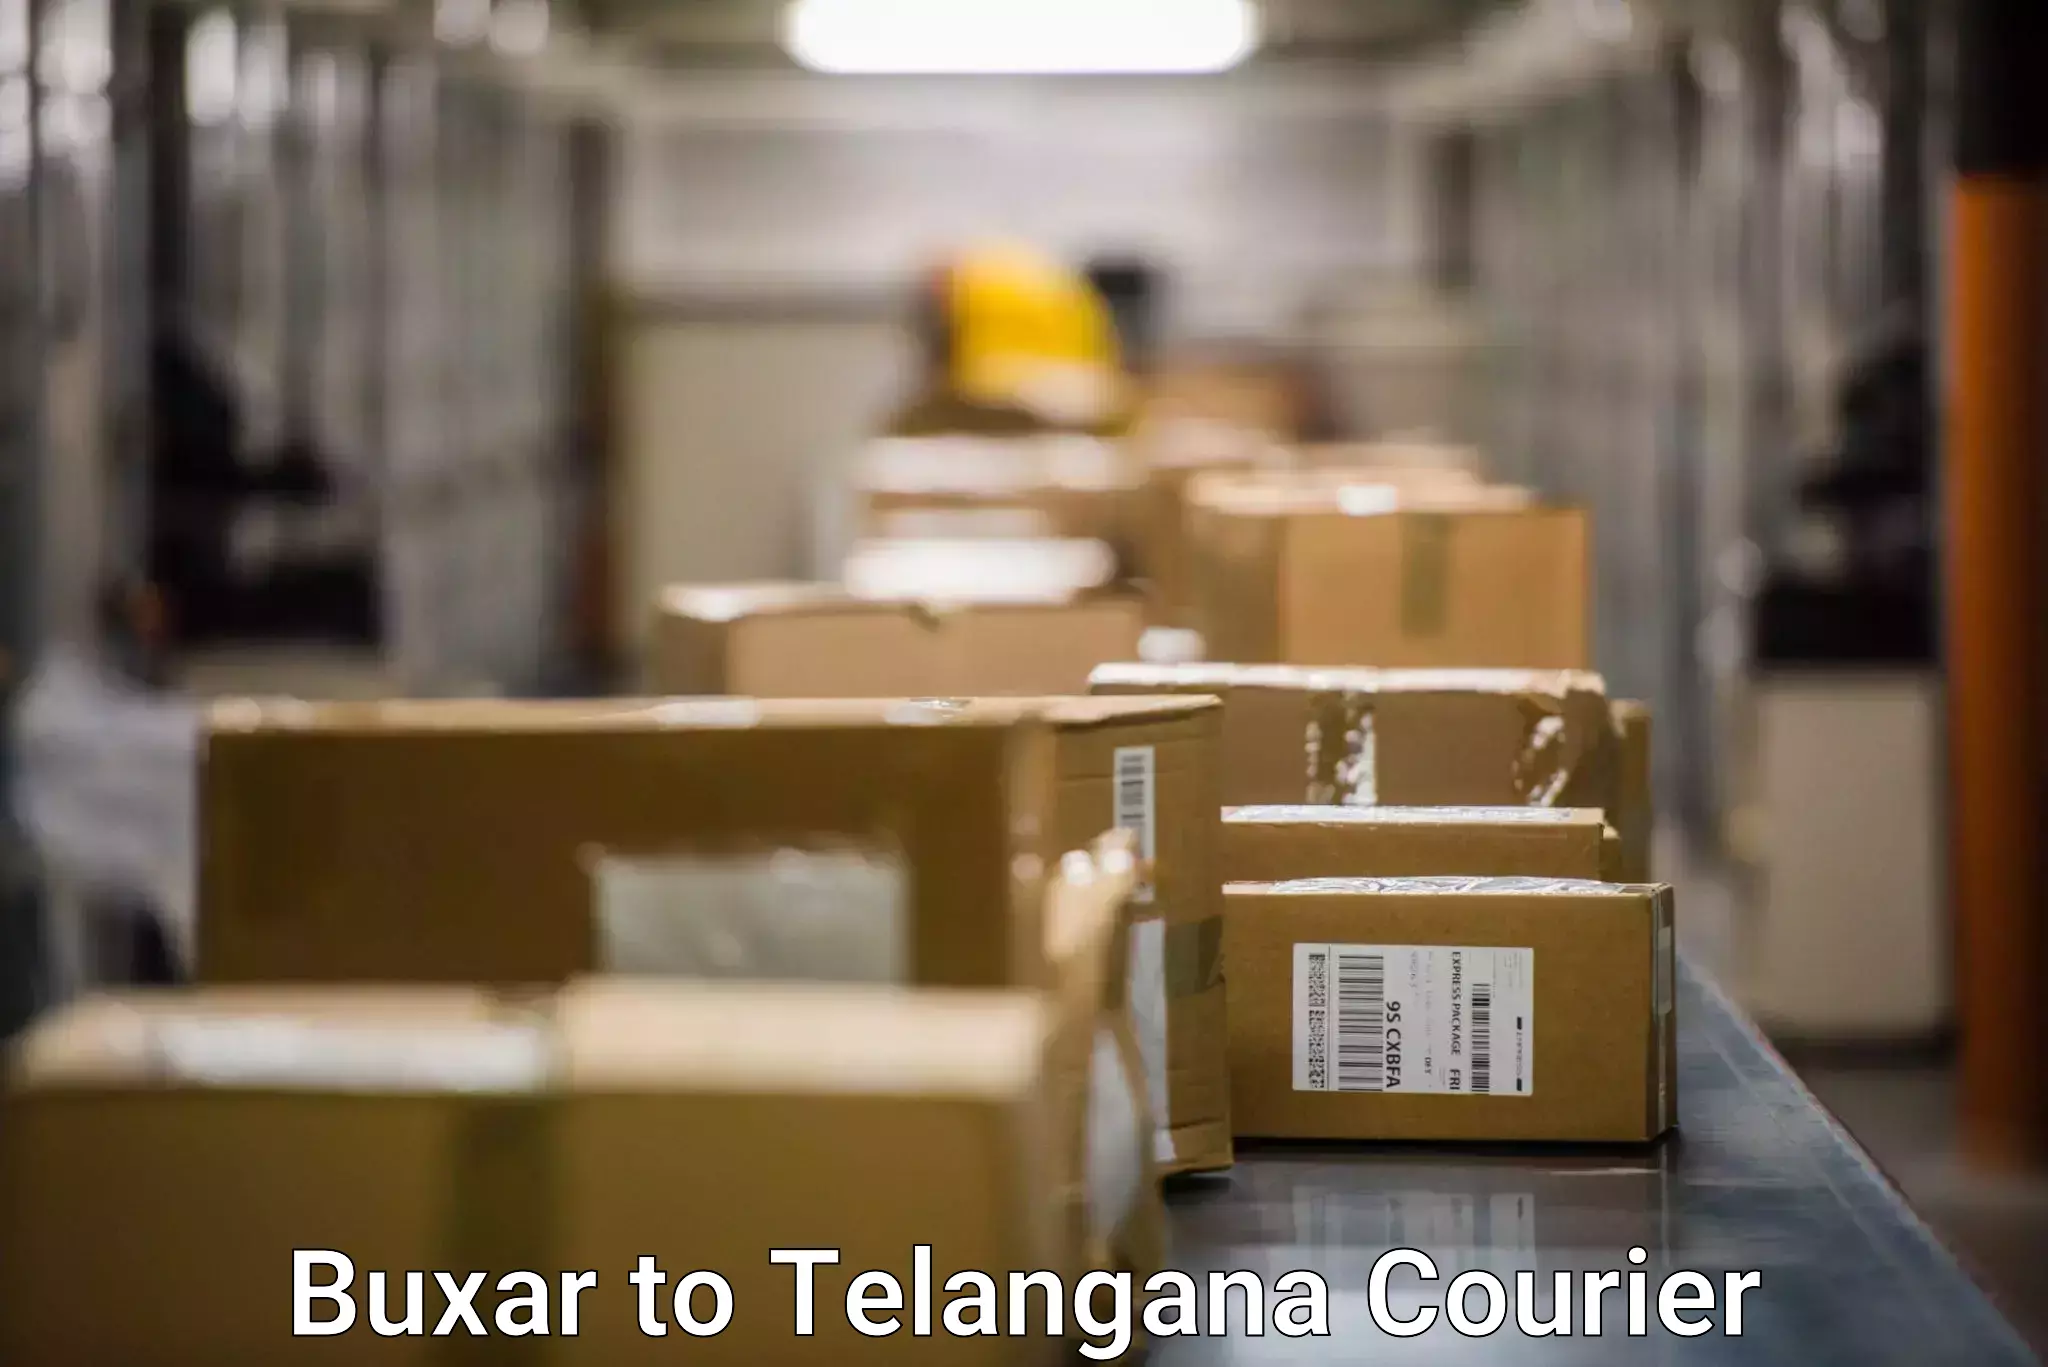 International courier networks Buxar to Mominpet